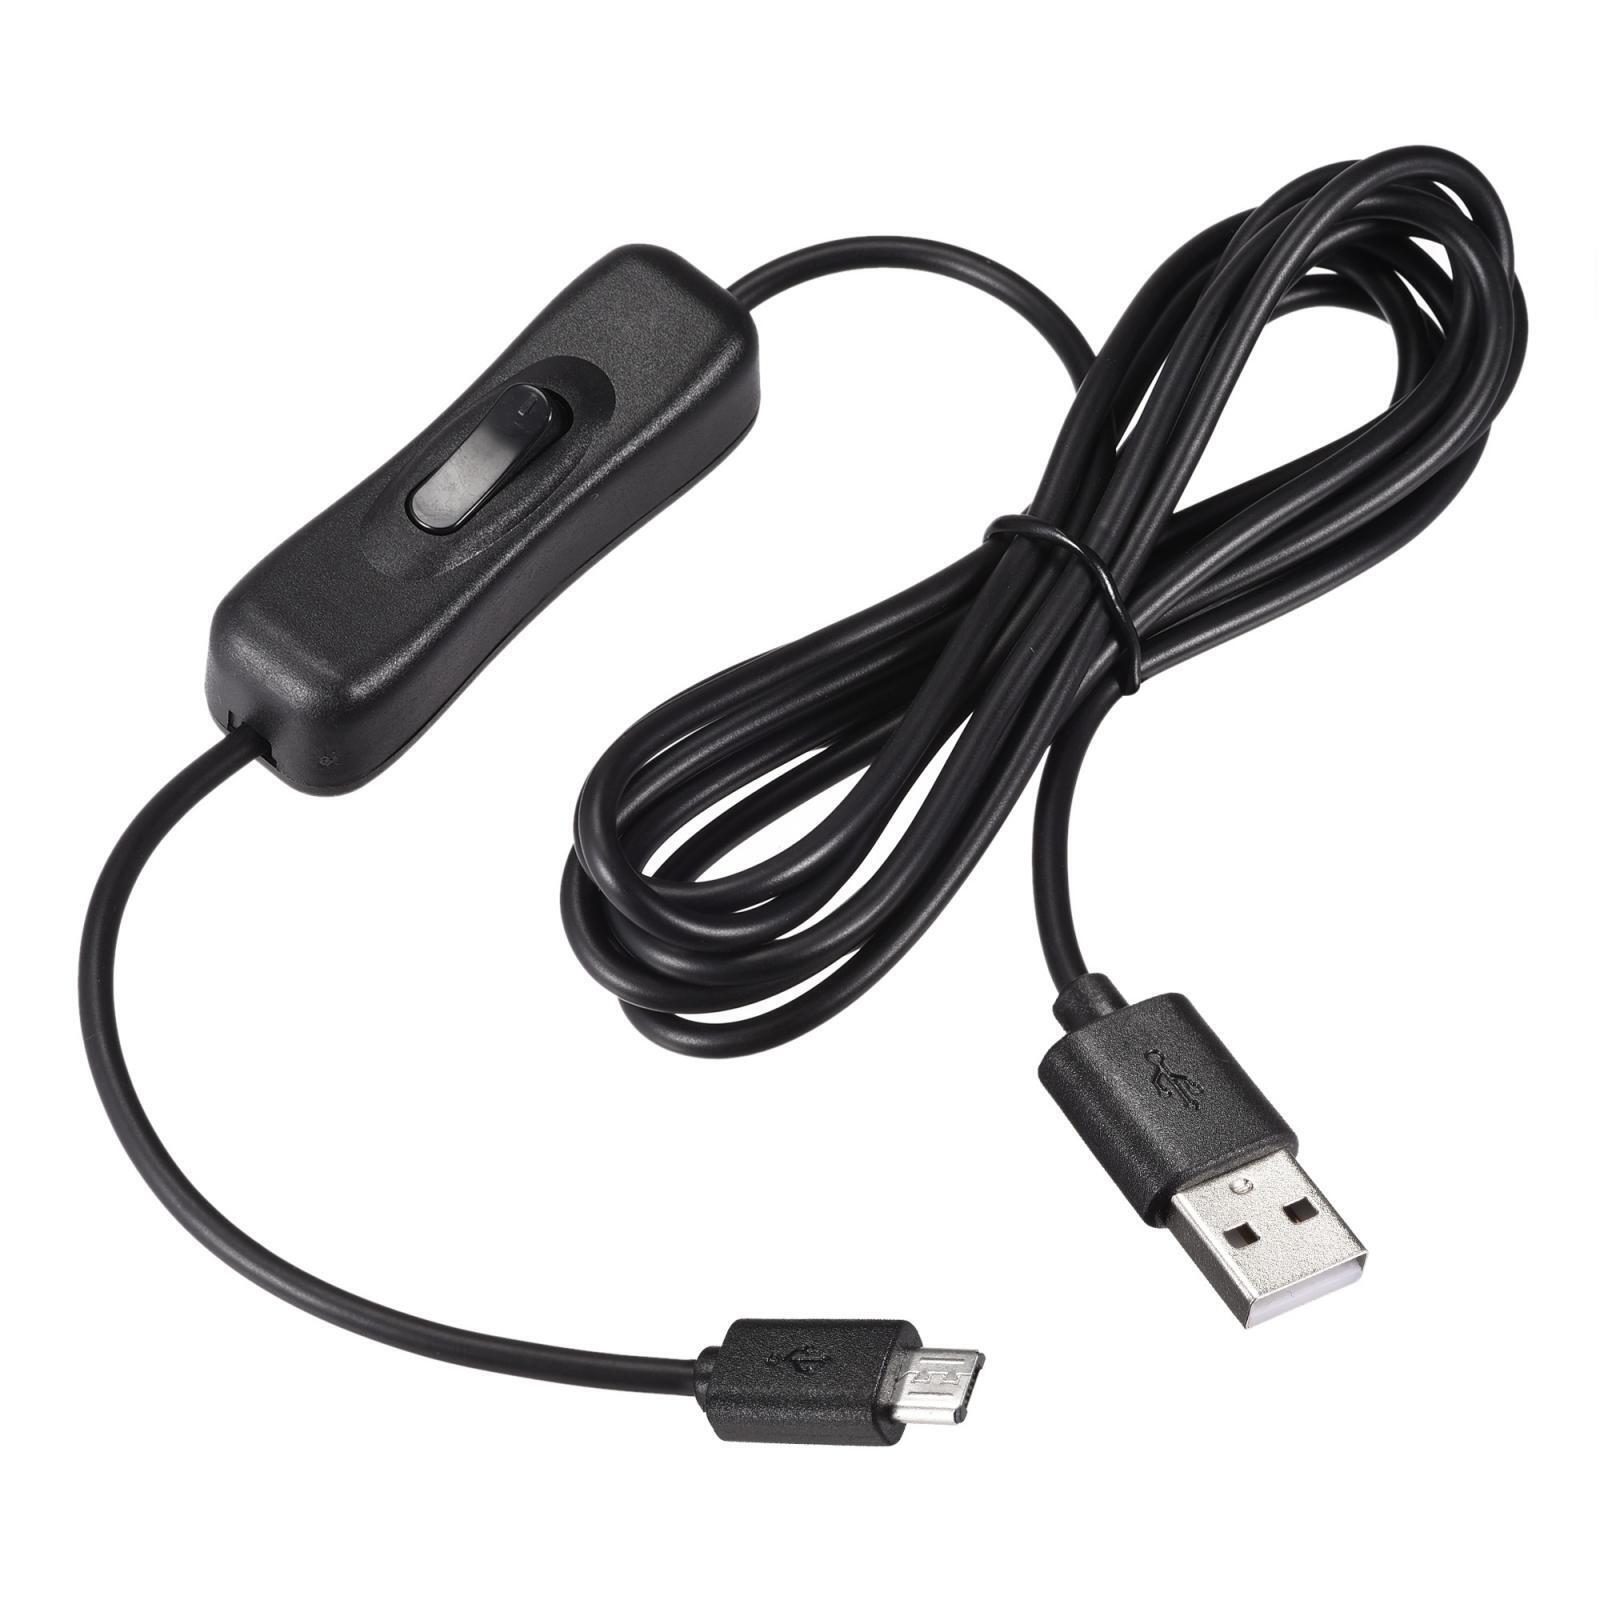 USB Cable with ON/Off Switch USB Male to Micro USB Male Extension Cord 2M Black